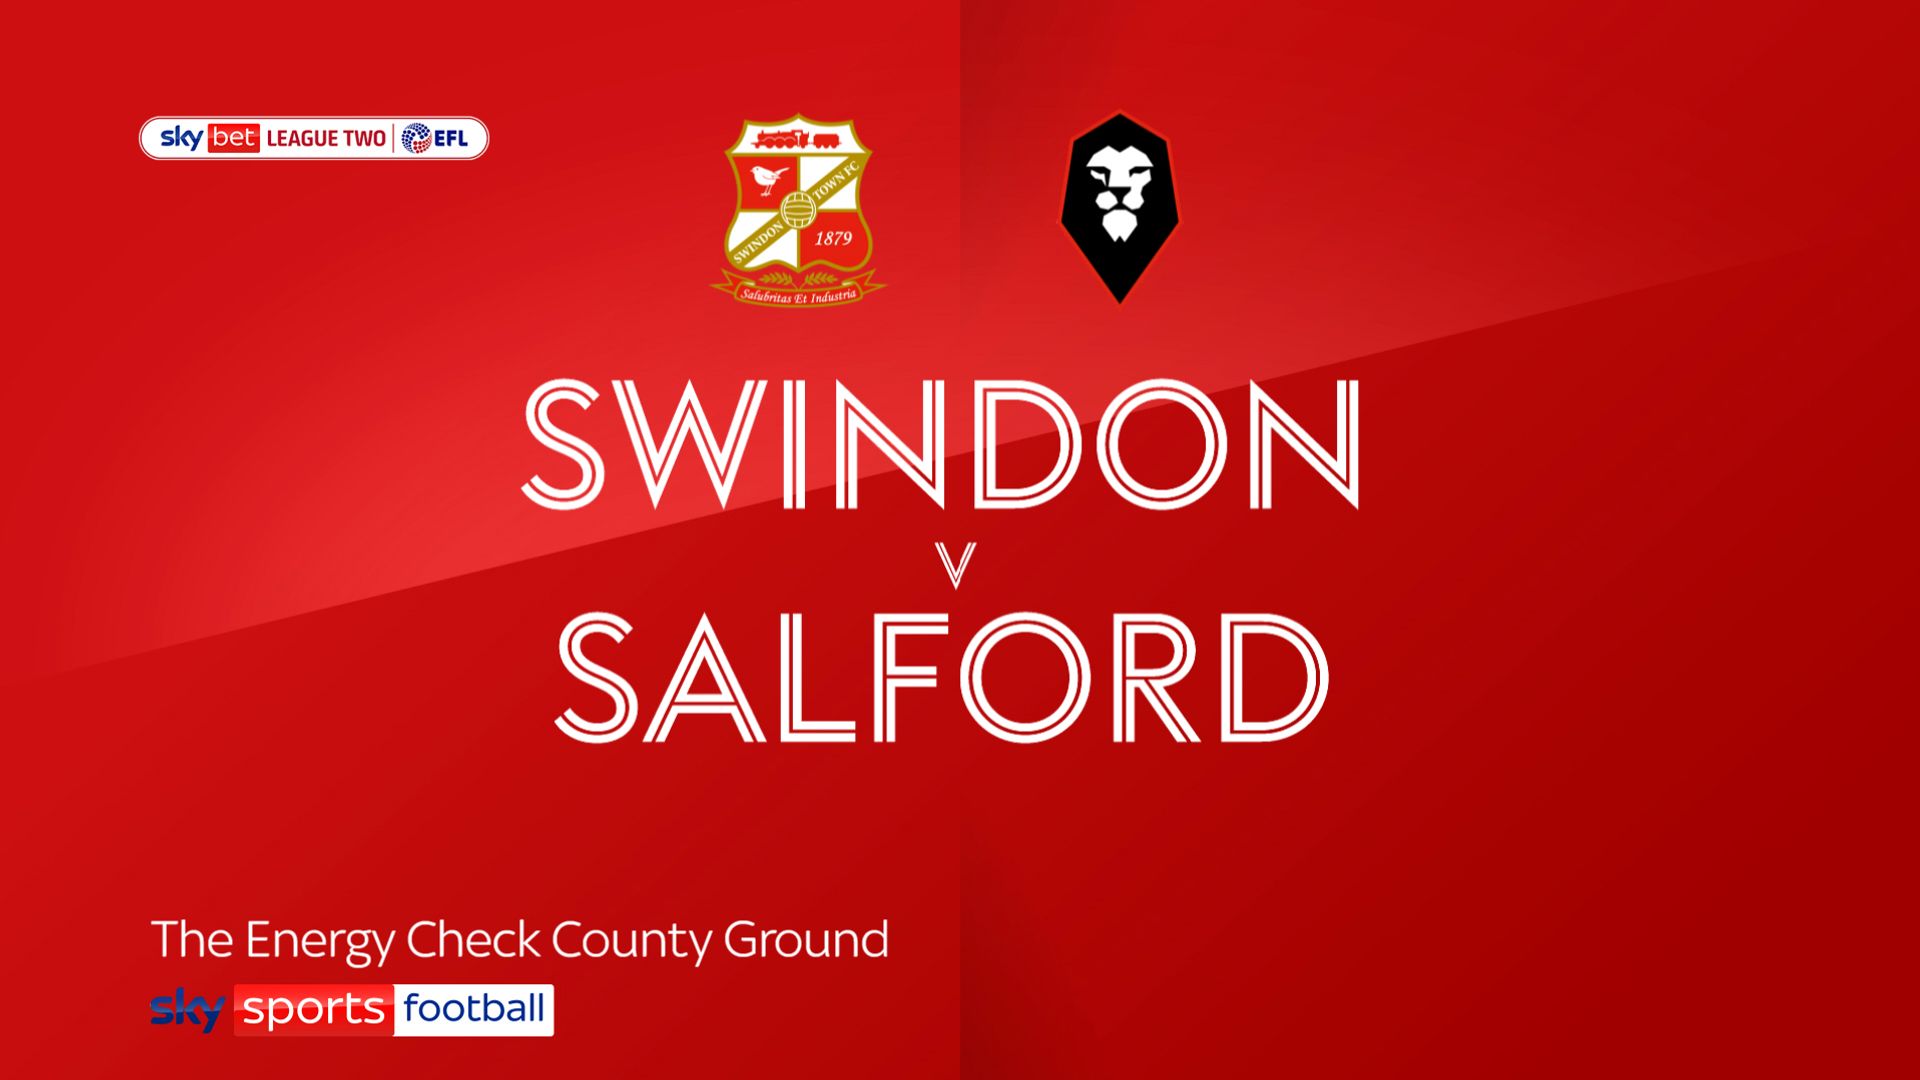 McKirdy sent off as Swindon held by Salford